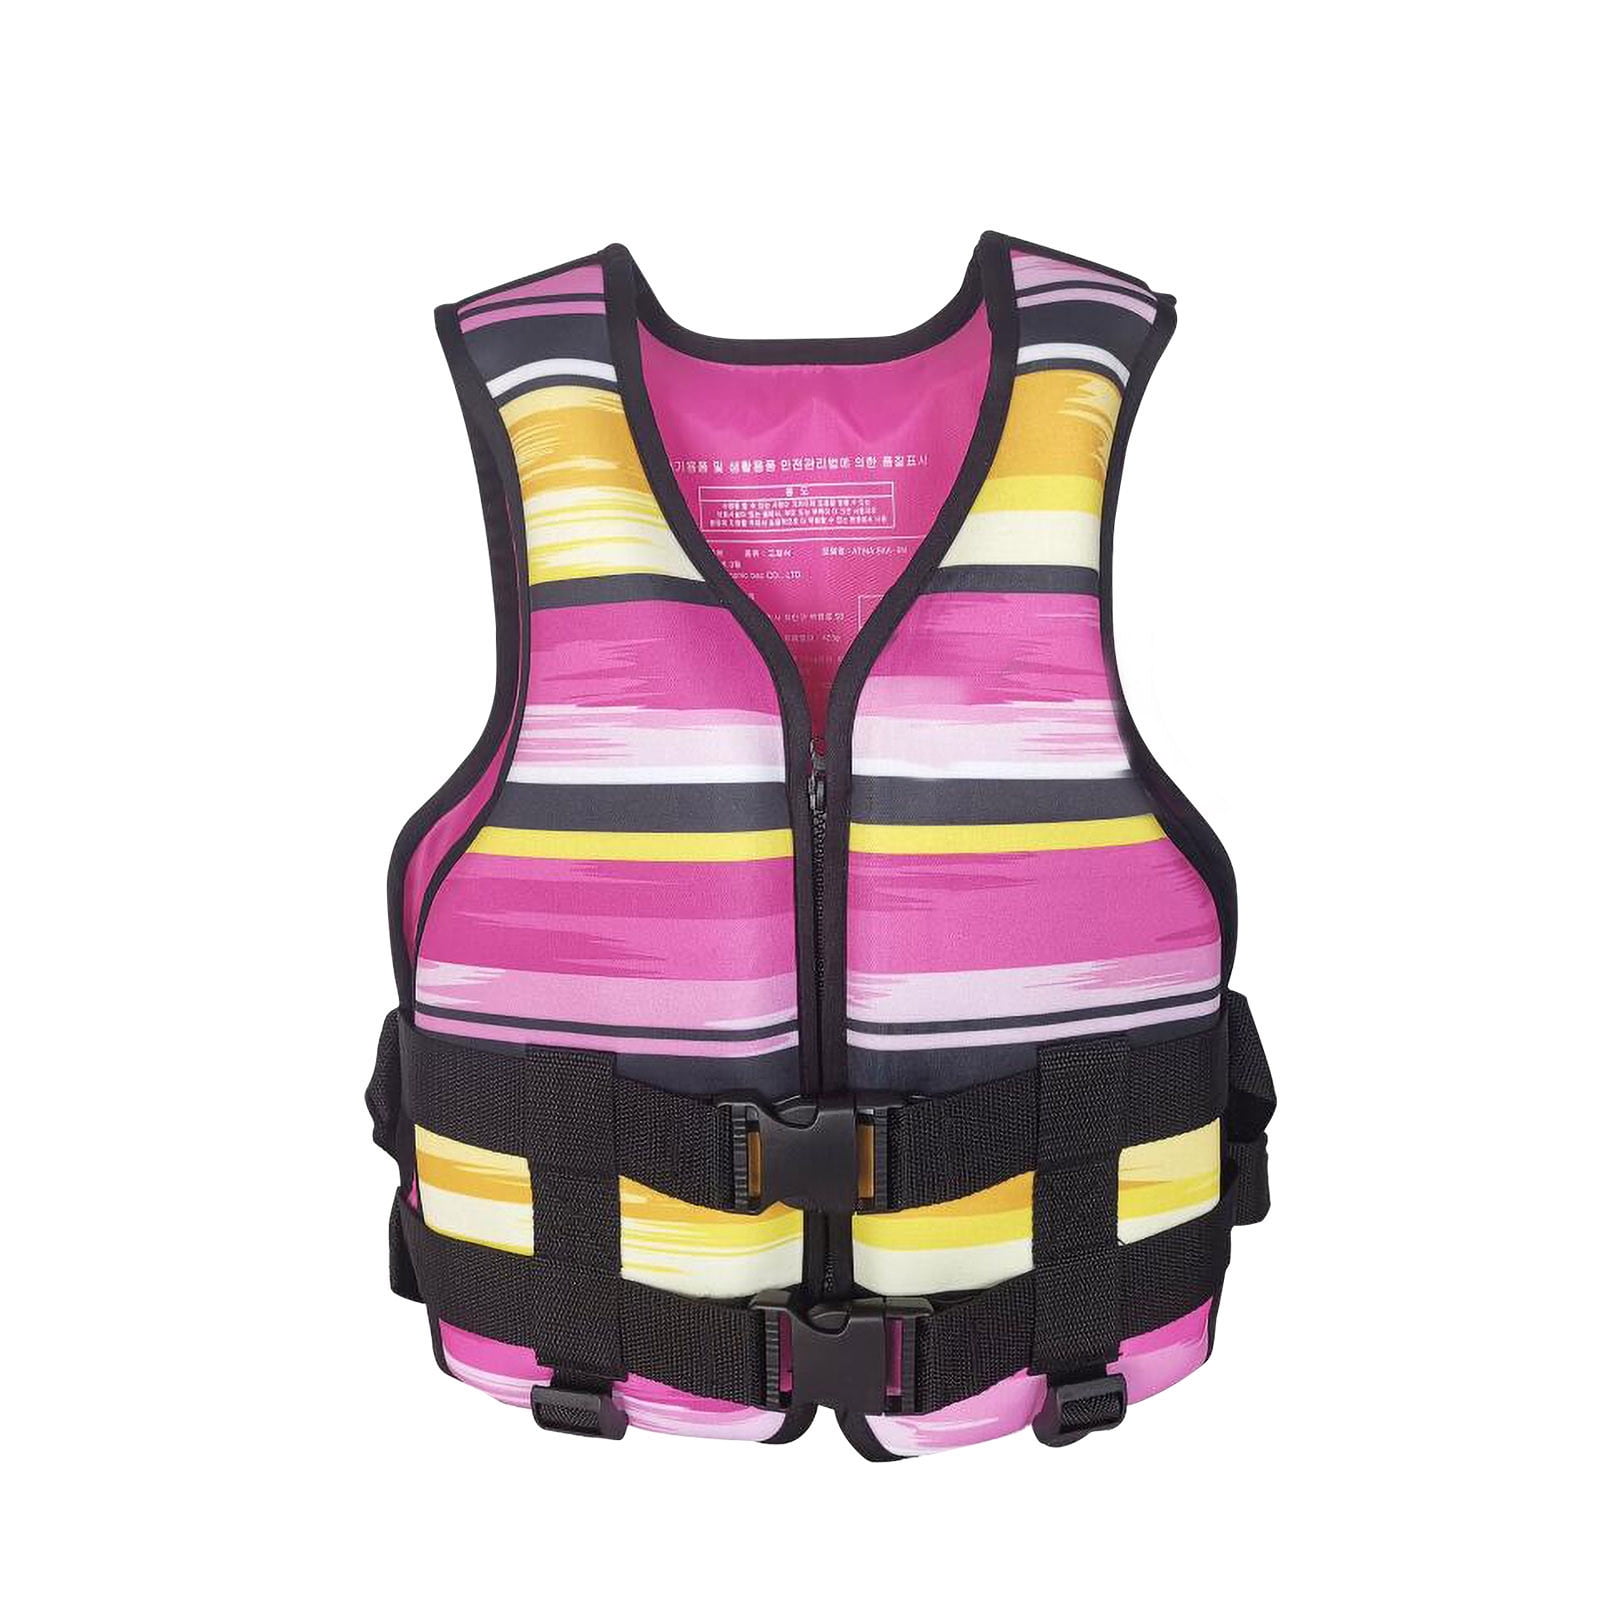 Details about   Breathable Life Jacket Life Vest Buoyancy Buoy Floatation Device Safety Gear 